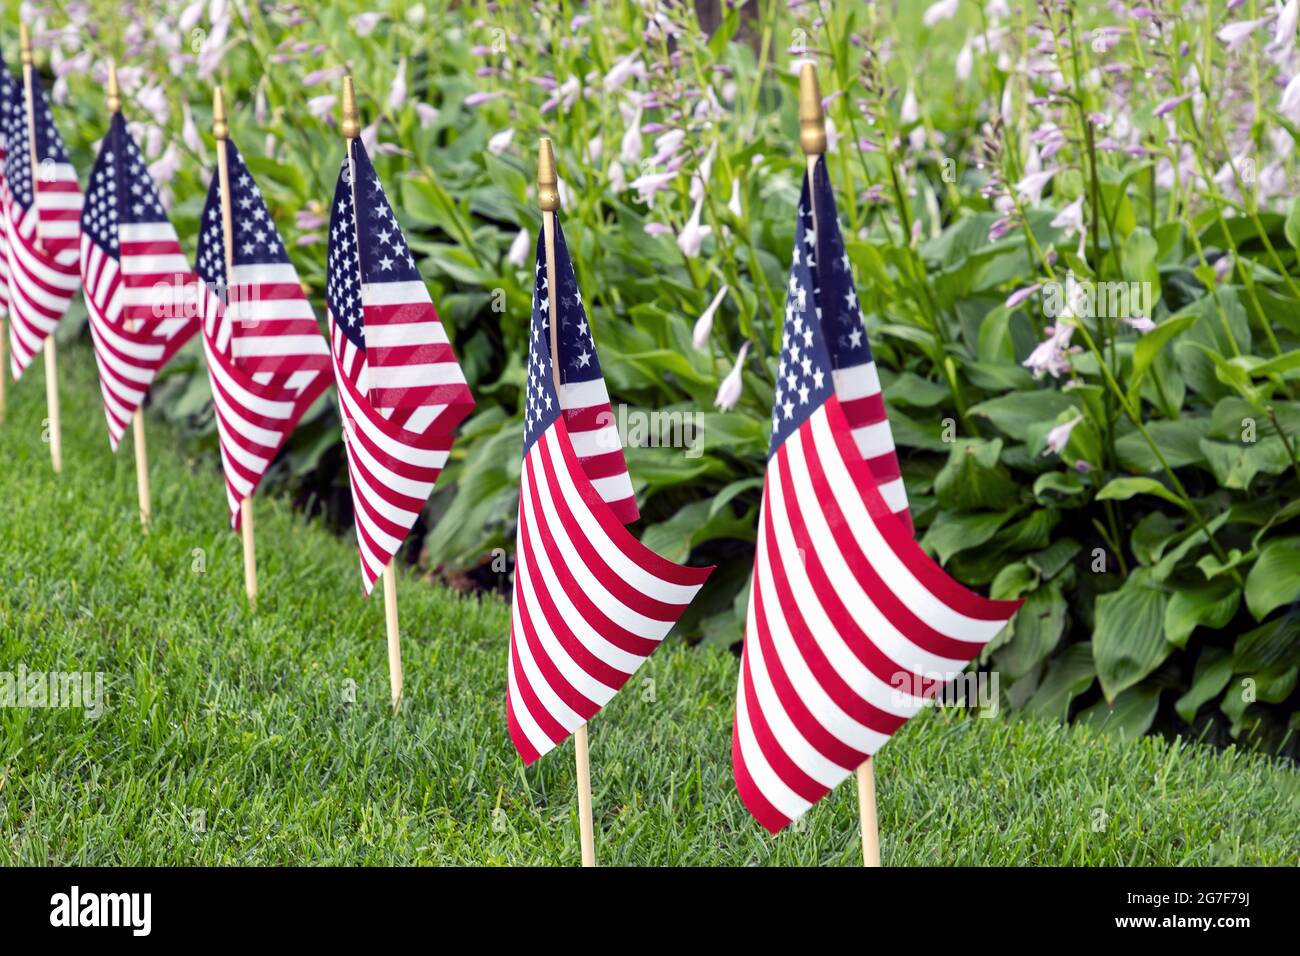 row of American flags in grass with hosta plants in background Stock Photo